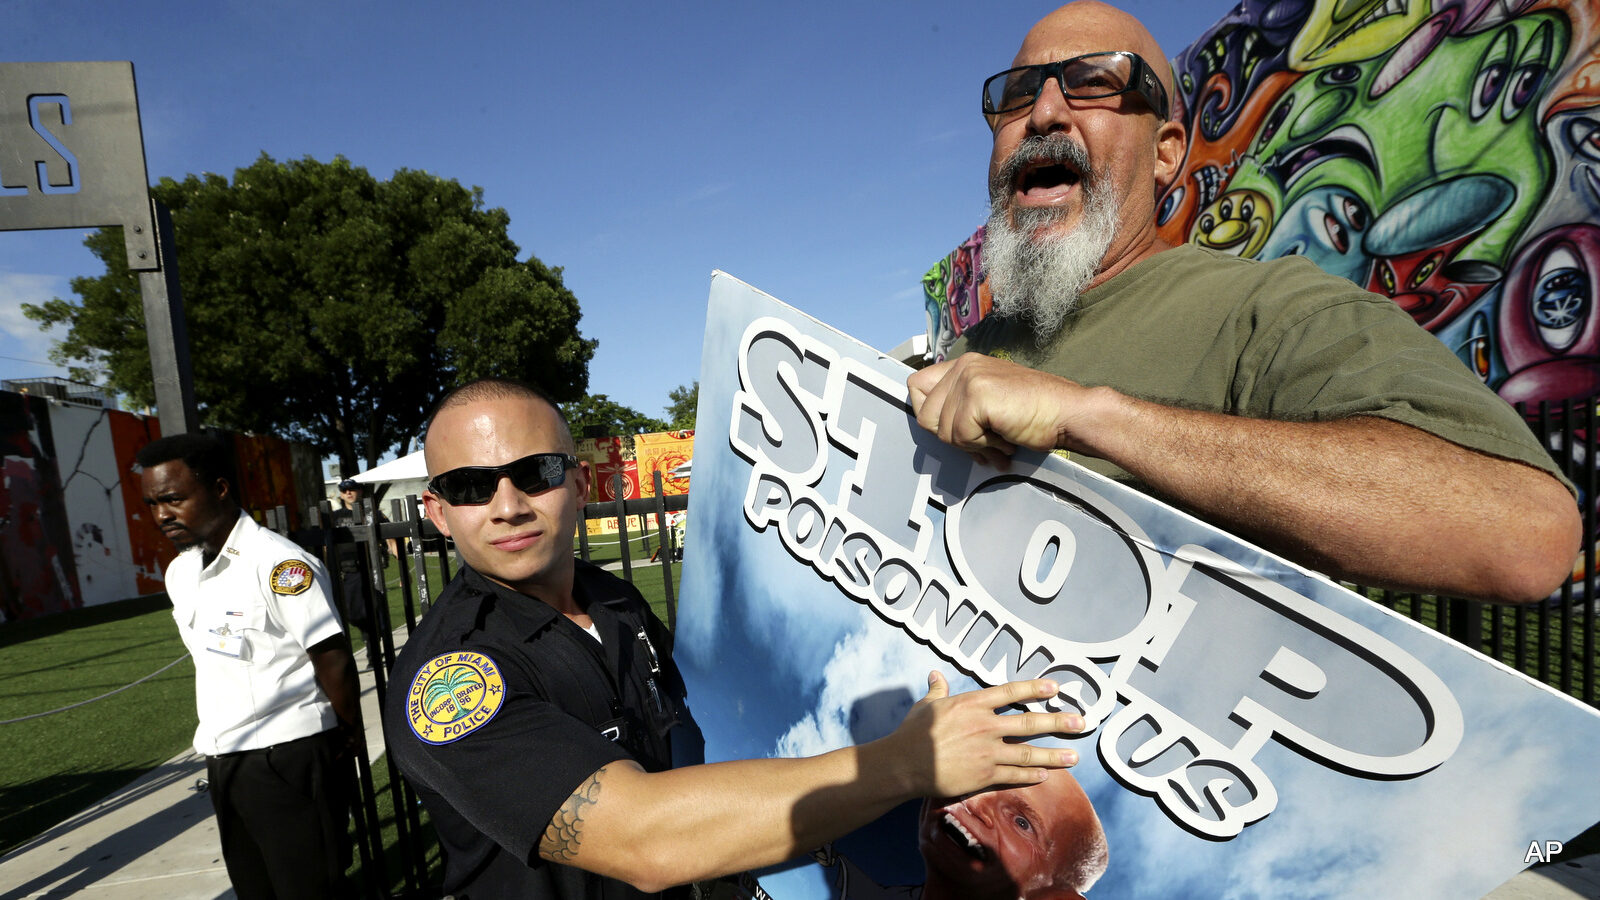 A Miami police officer holds back protestor Judd Allison, right, as Florida Gov. Rick Scott leaves a news conference at Wynwood Walls, Monday, Sept. 19, 2016, in the Wynwood neighborhood of Miami. The governor said the arts district is no longer considered a zone of active Zika transmission. It has been 45 days since the last Zika detection. Allison was protesting the use of the pesticide naled, which was used in the area to combat Zika.